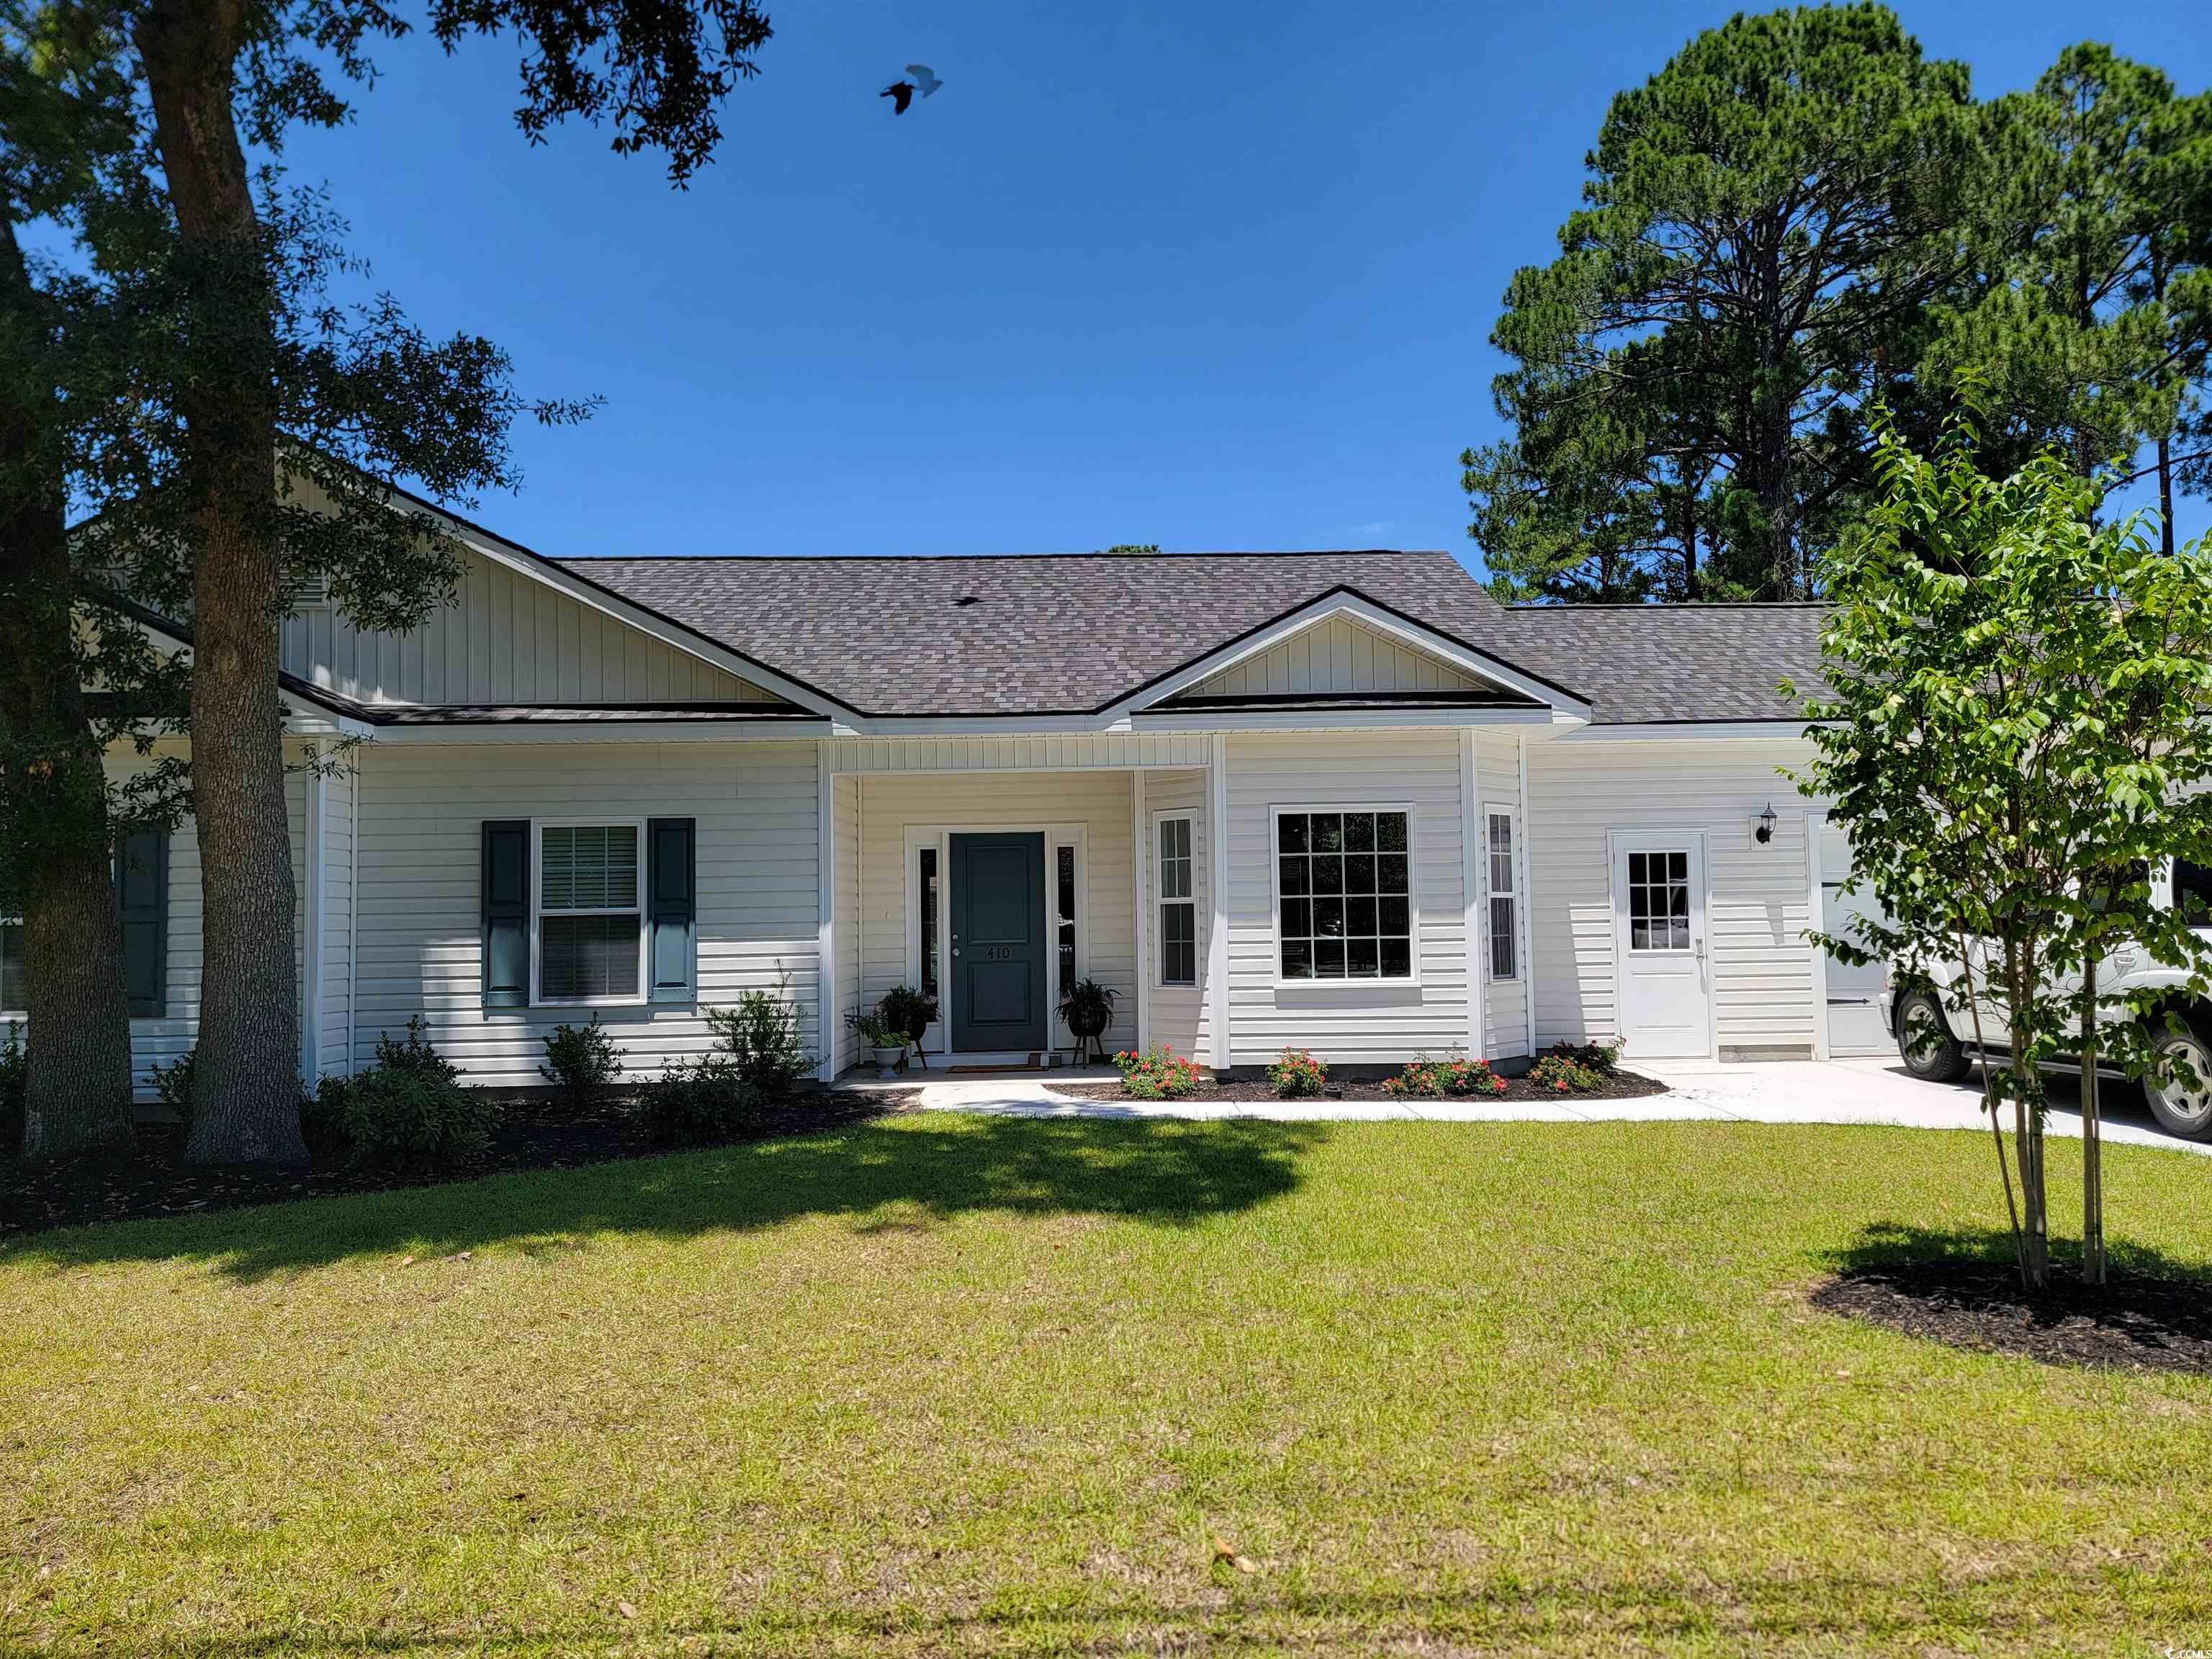 Lot 44 Rosemary St. Georgetown, SC 29440